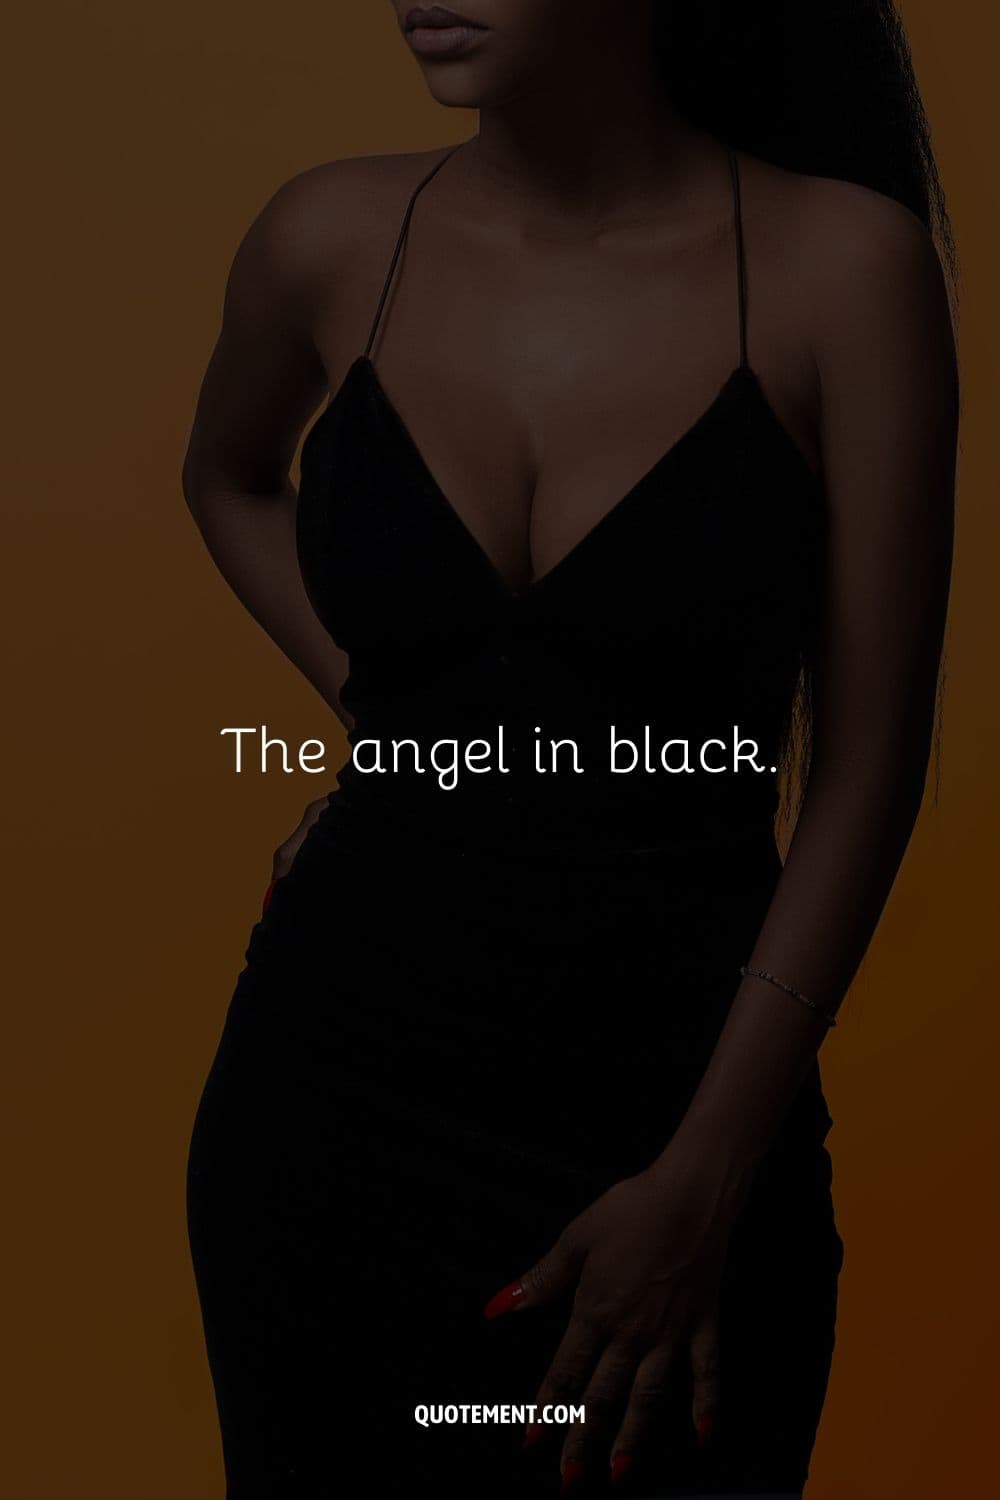 The angel in black.